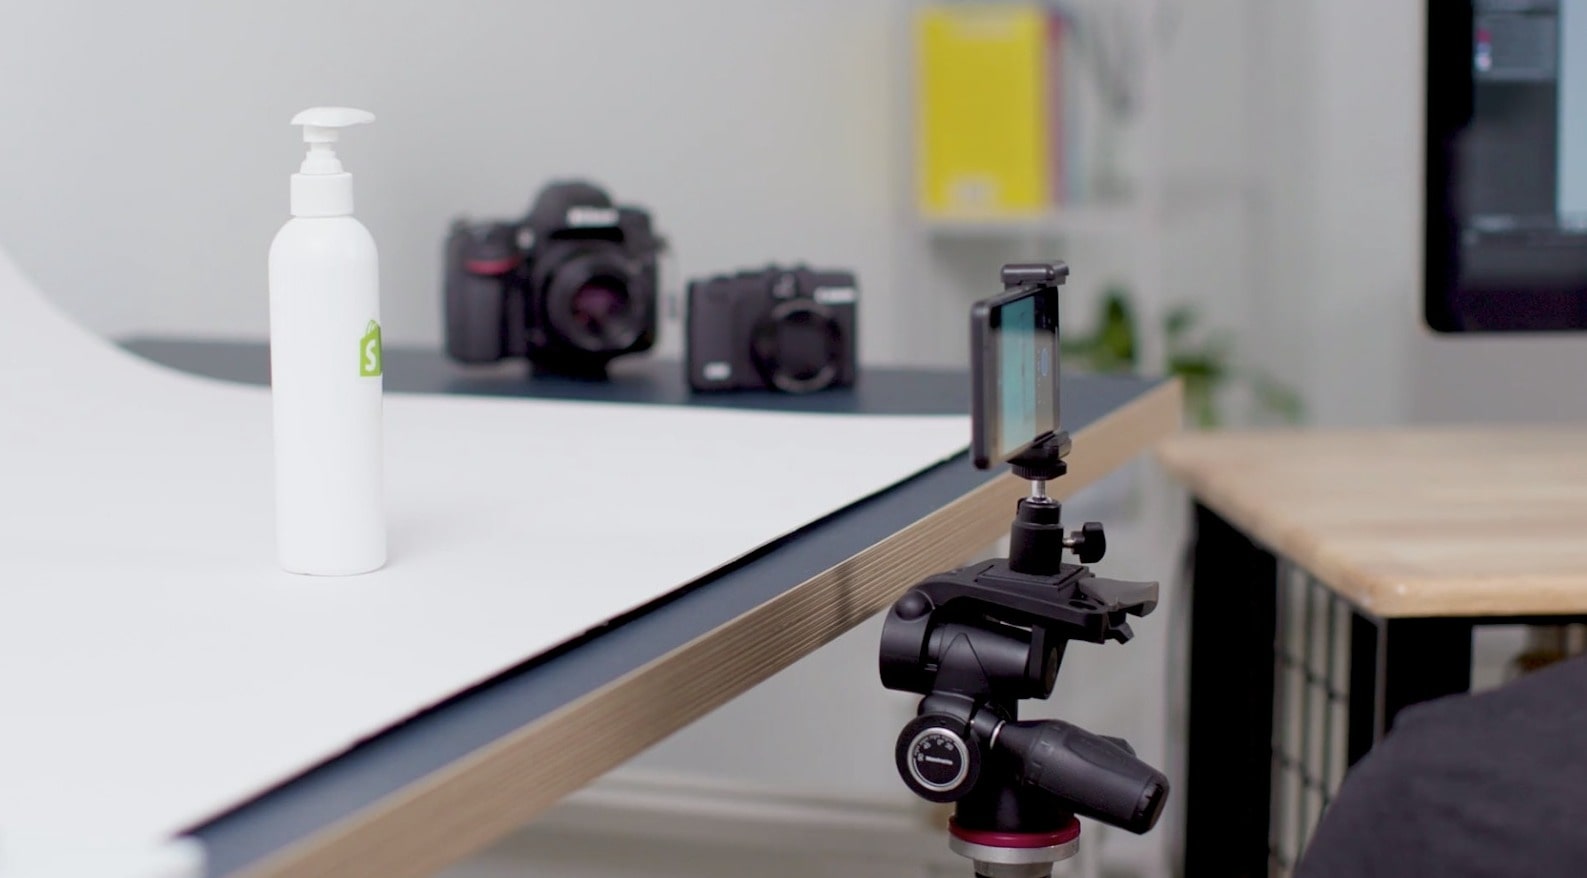 Frequently asked questions about product photography